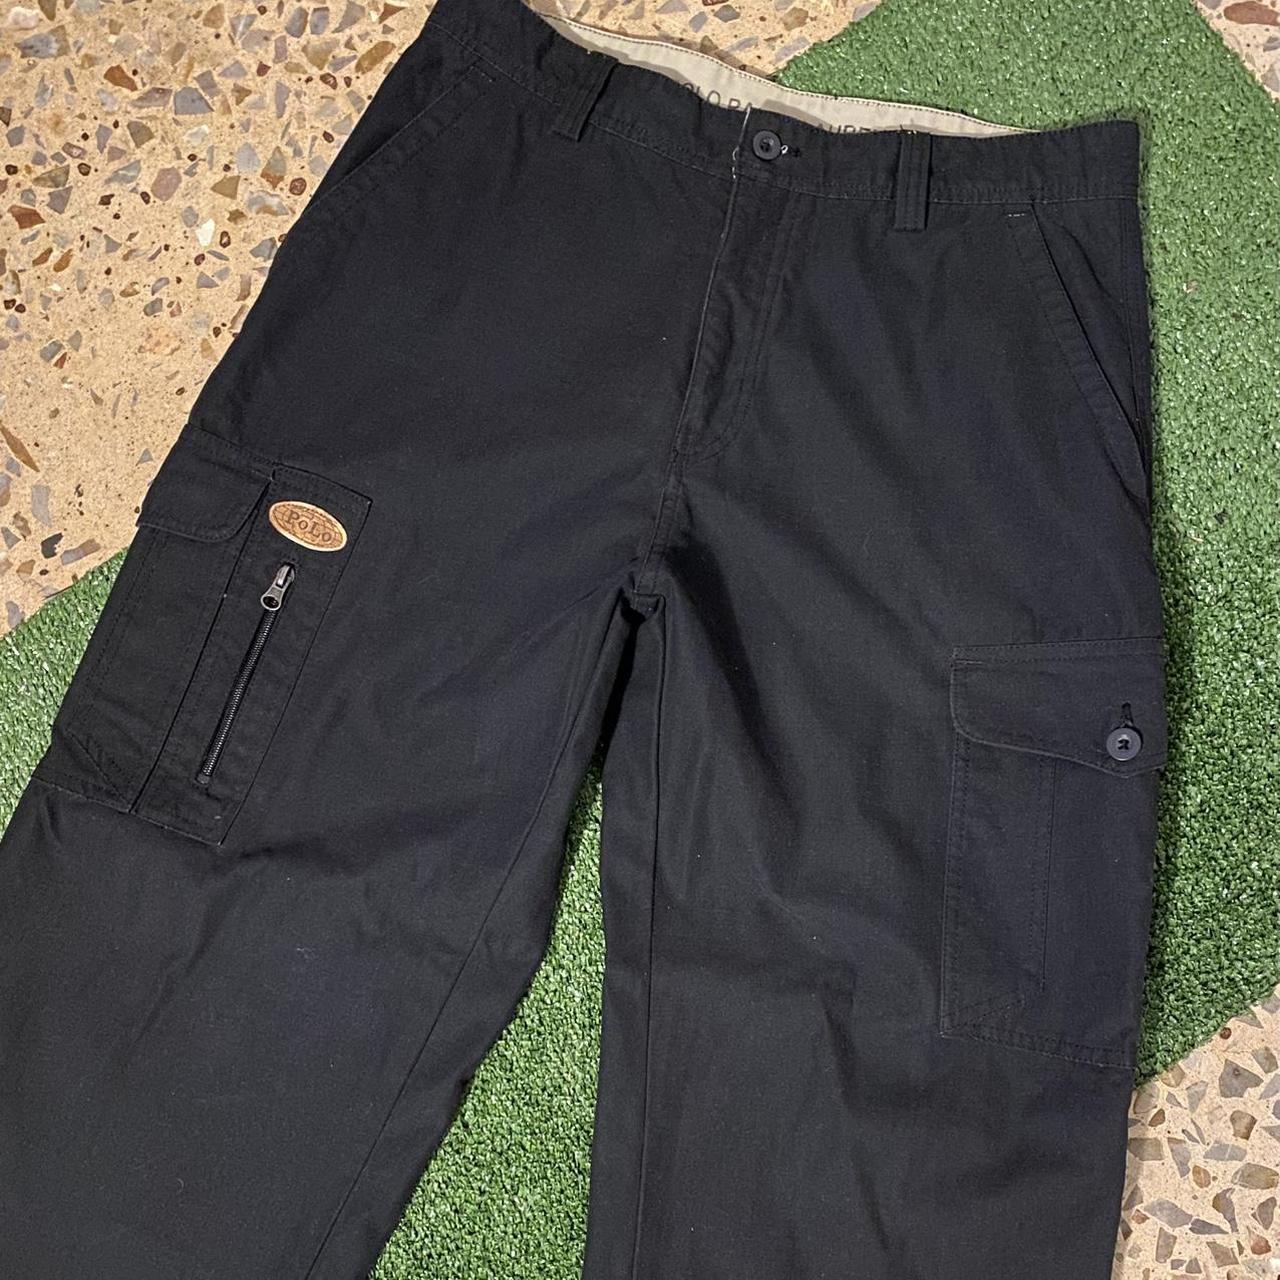 Polo branded Cargo pants Sick vintage fit with... - Depop